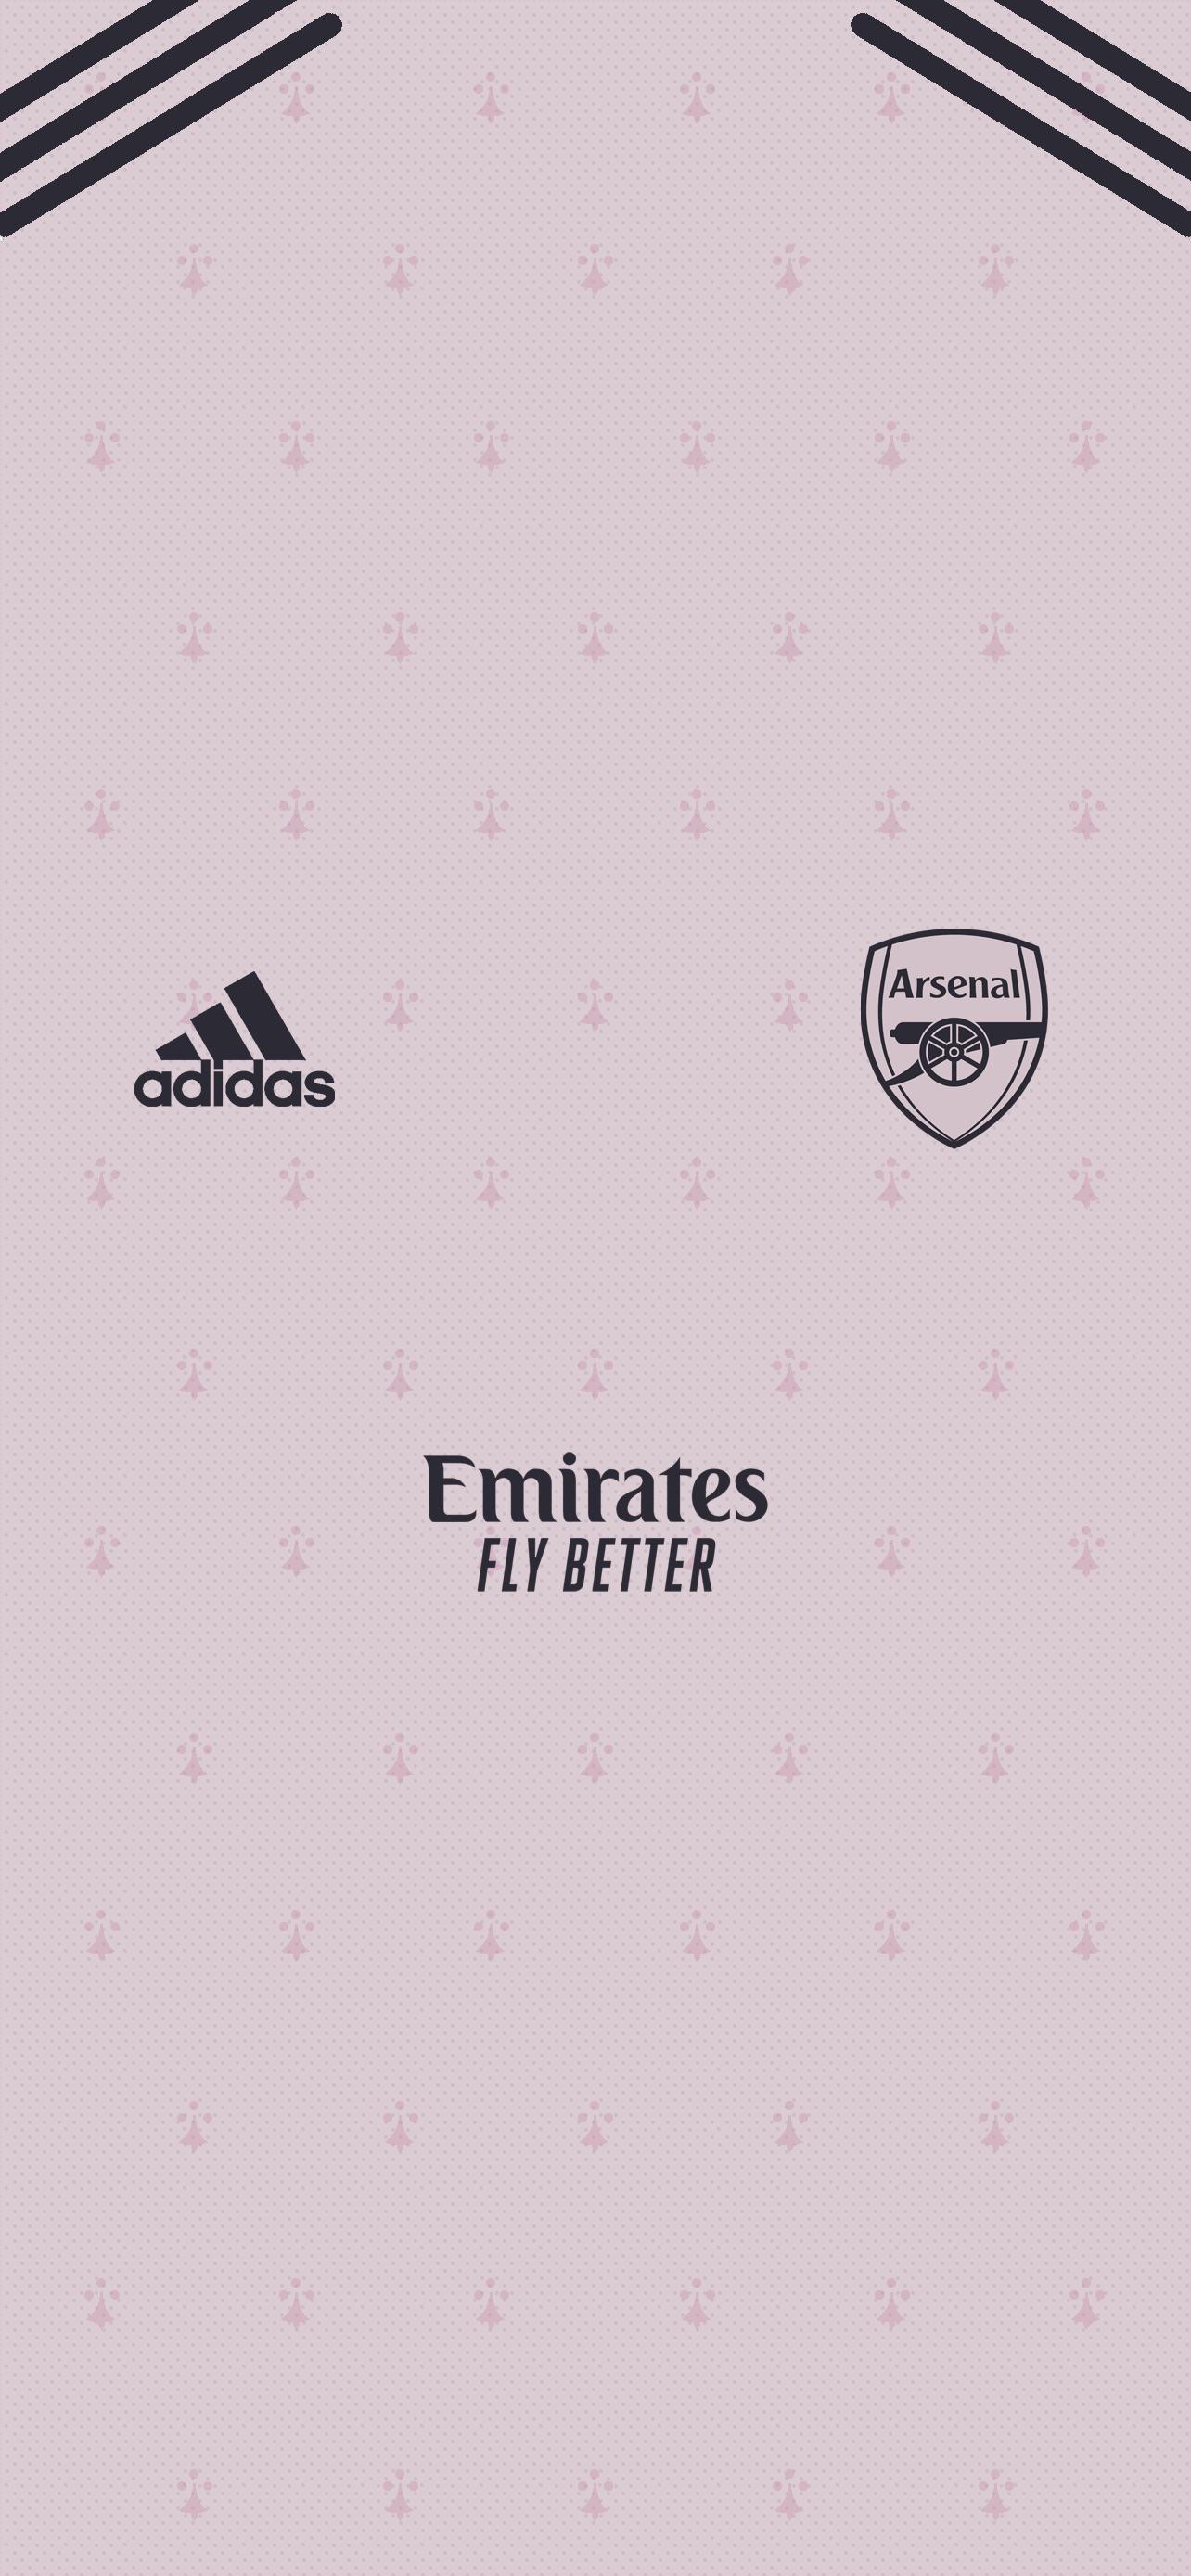 Some Phone Wallpaper I Made Based On Our New 3rd Kit R Gunners